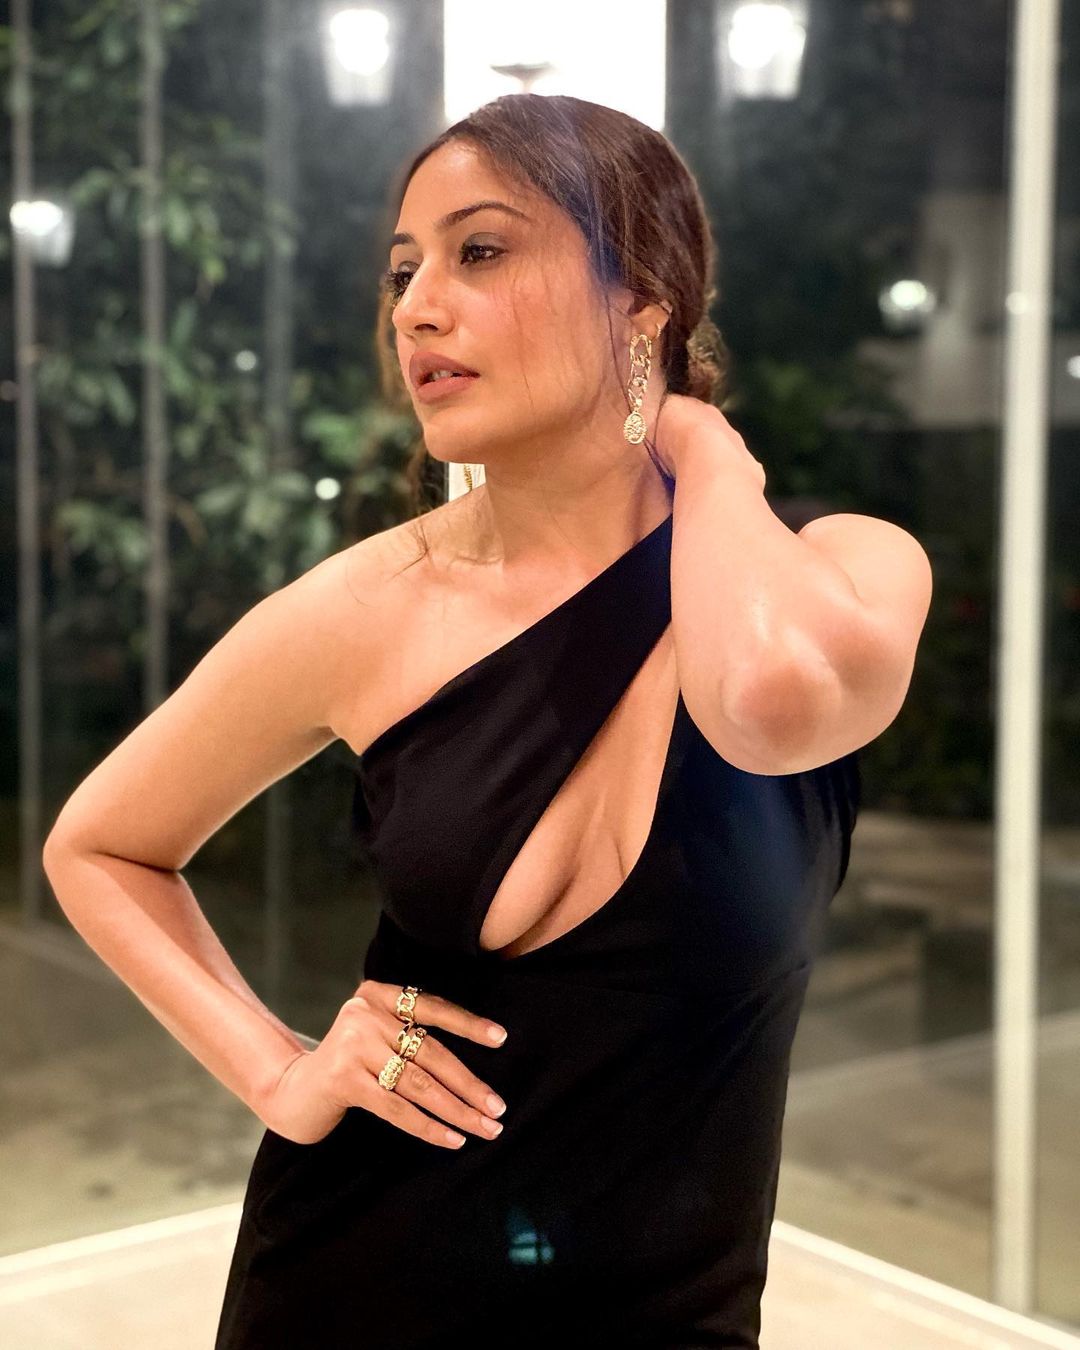 Surbhi Chandna shows off her cleavage in the asymmetrical dress